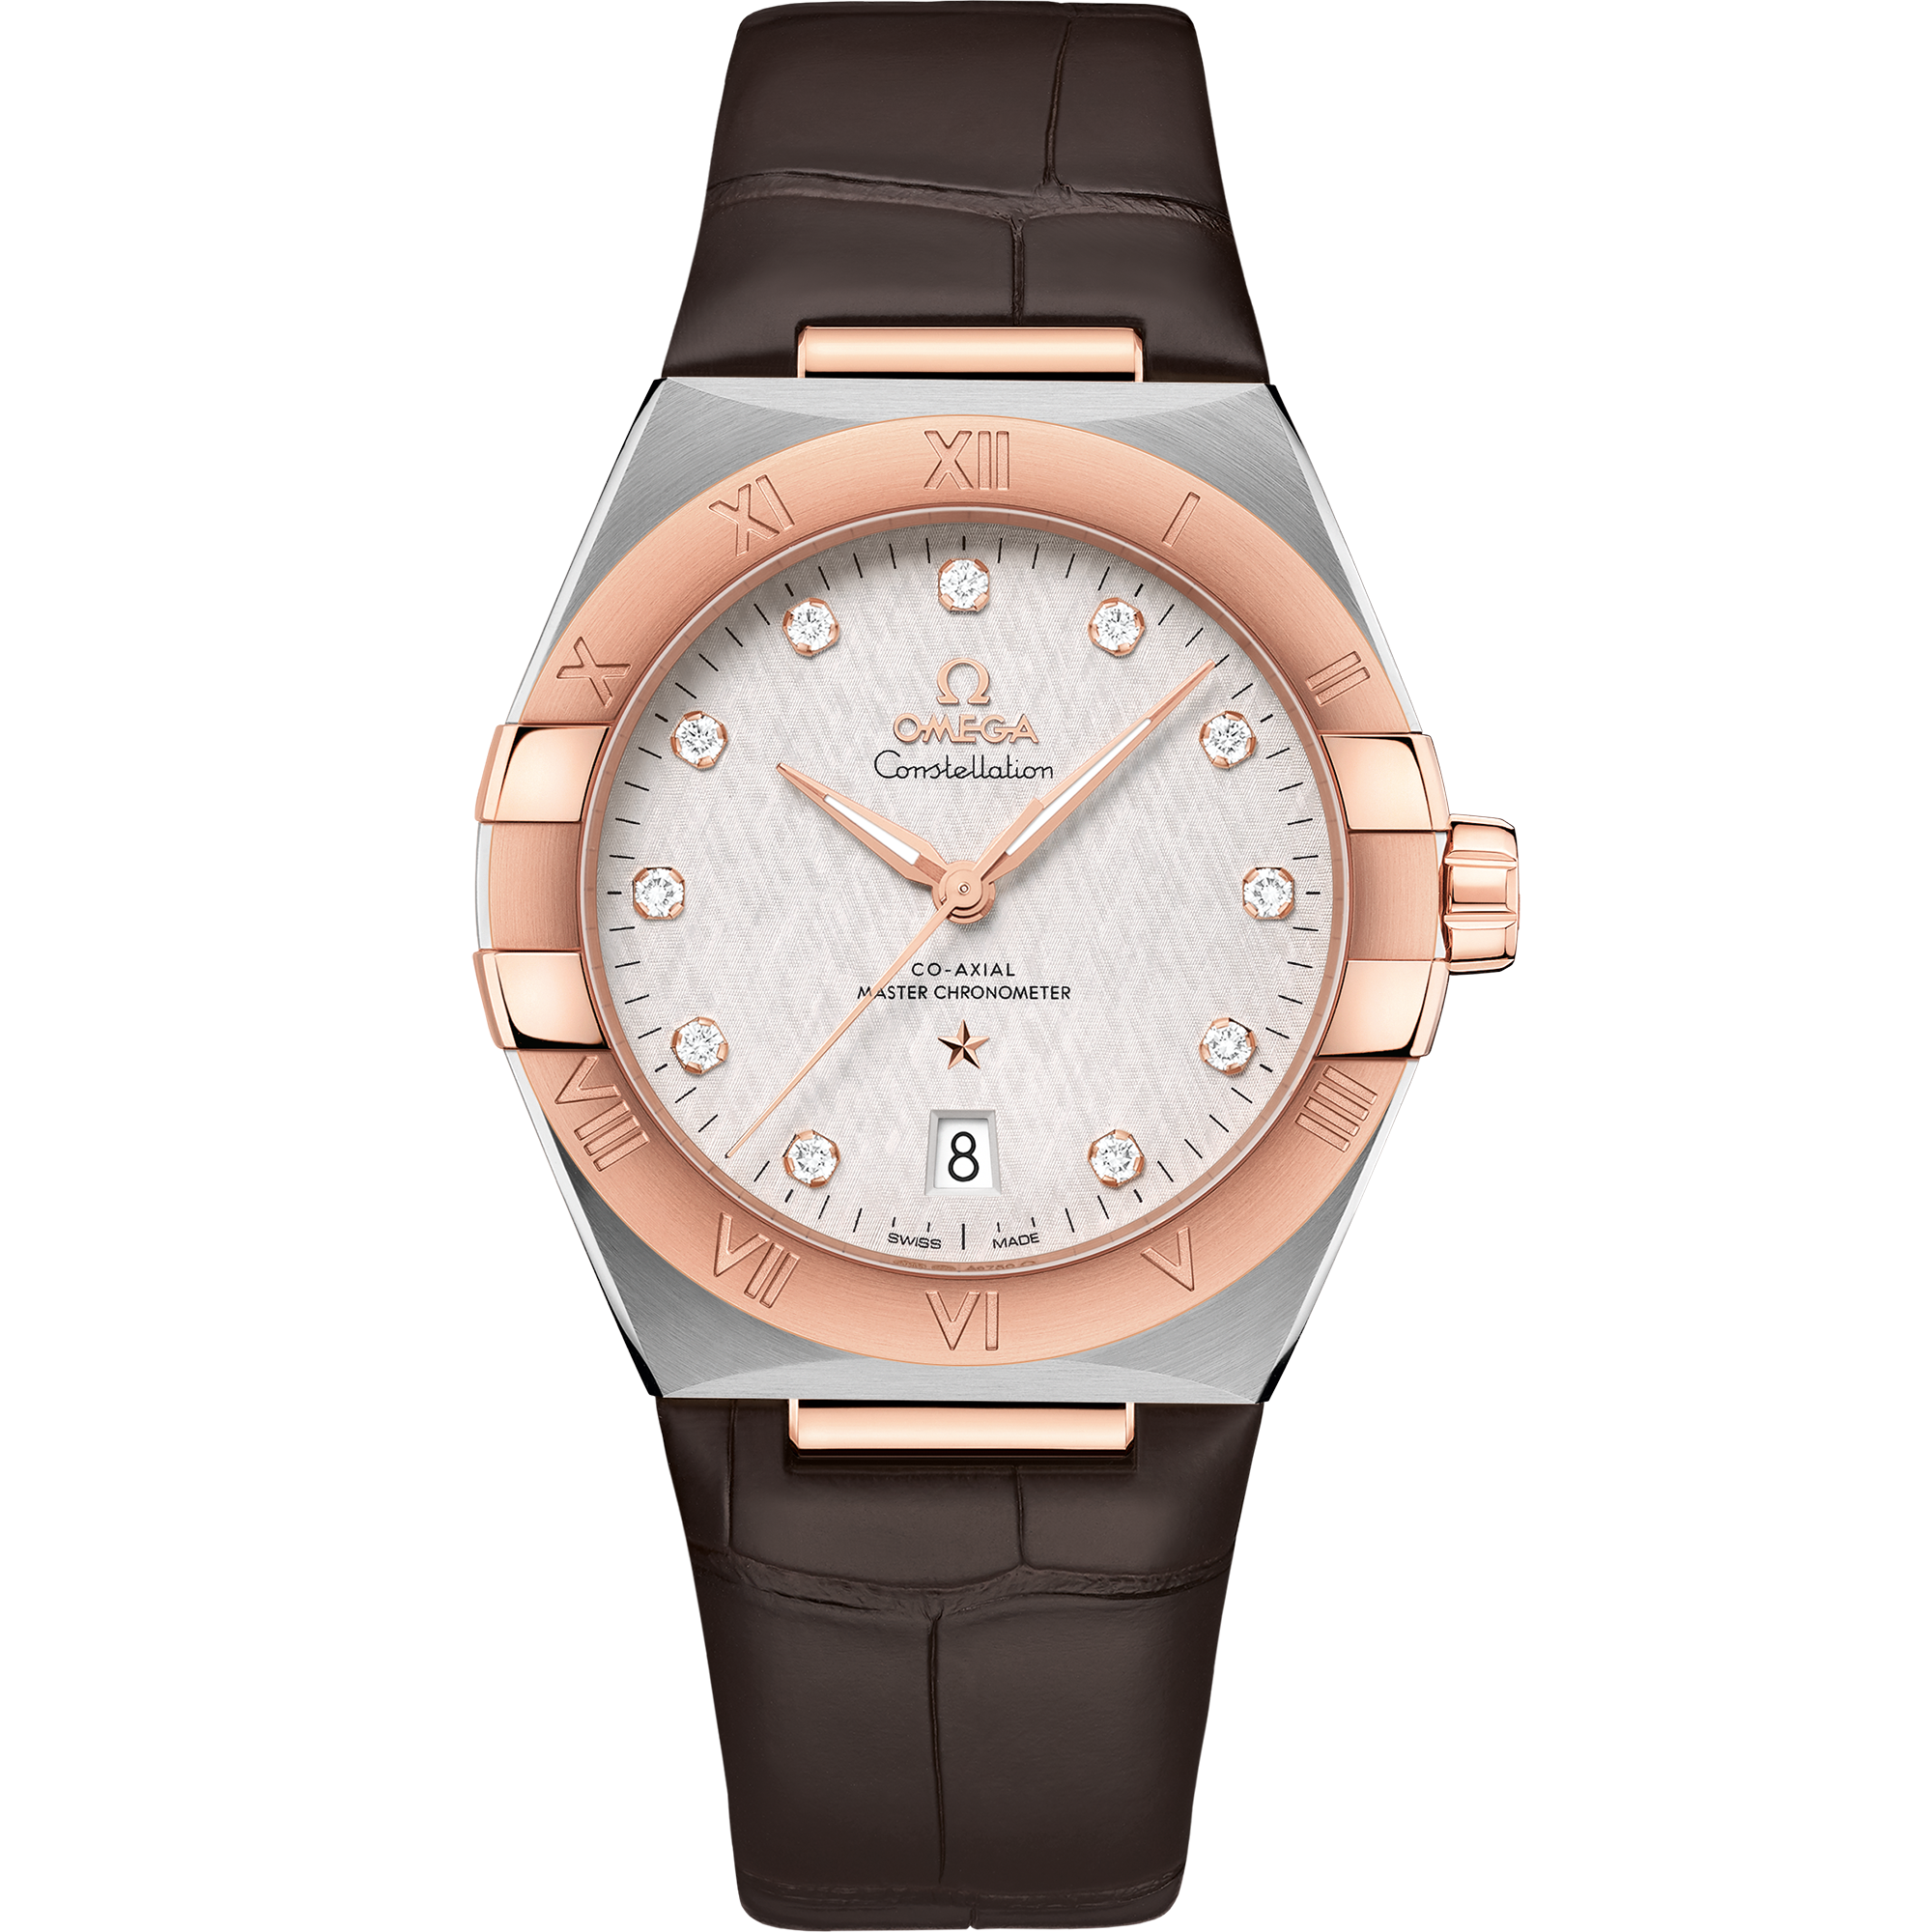 Constellation 39 mm, steel - Sedna™ gold on leather strap - 131.23.39.20.52.001